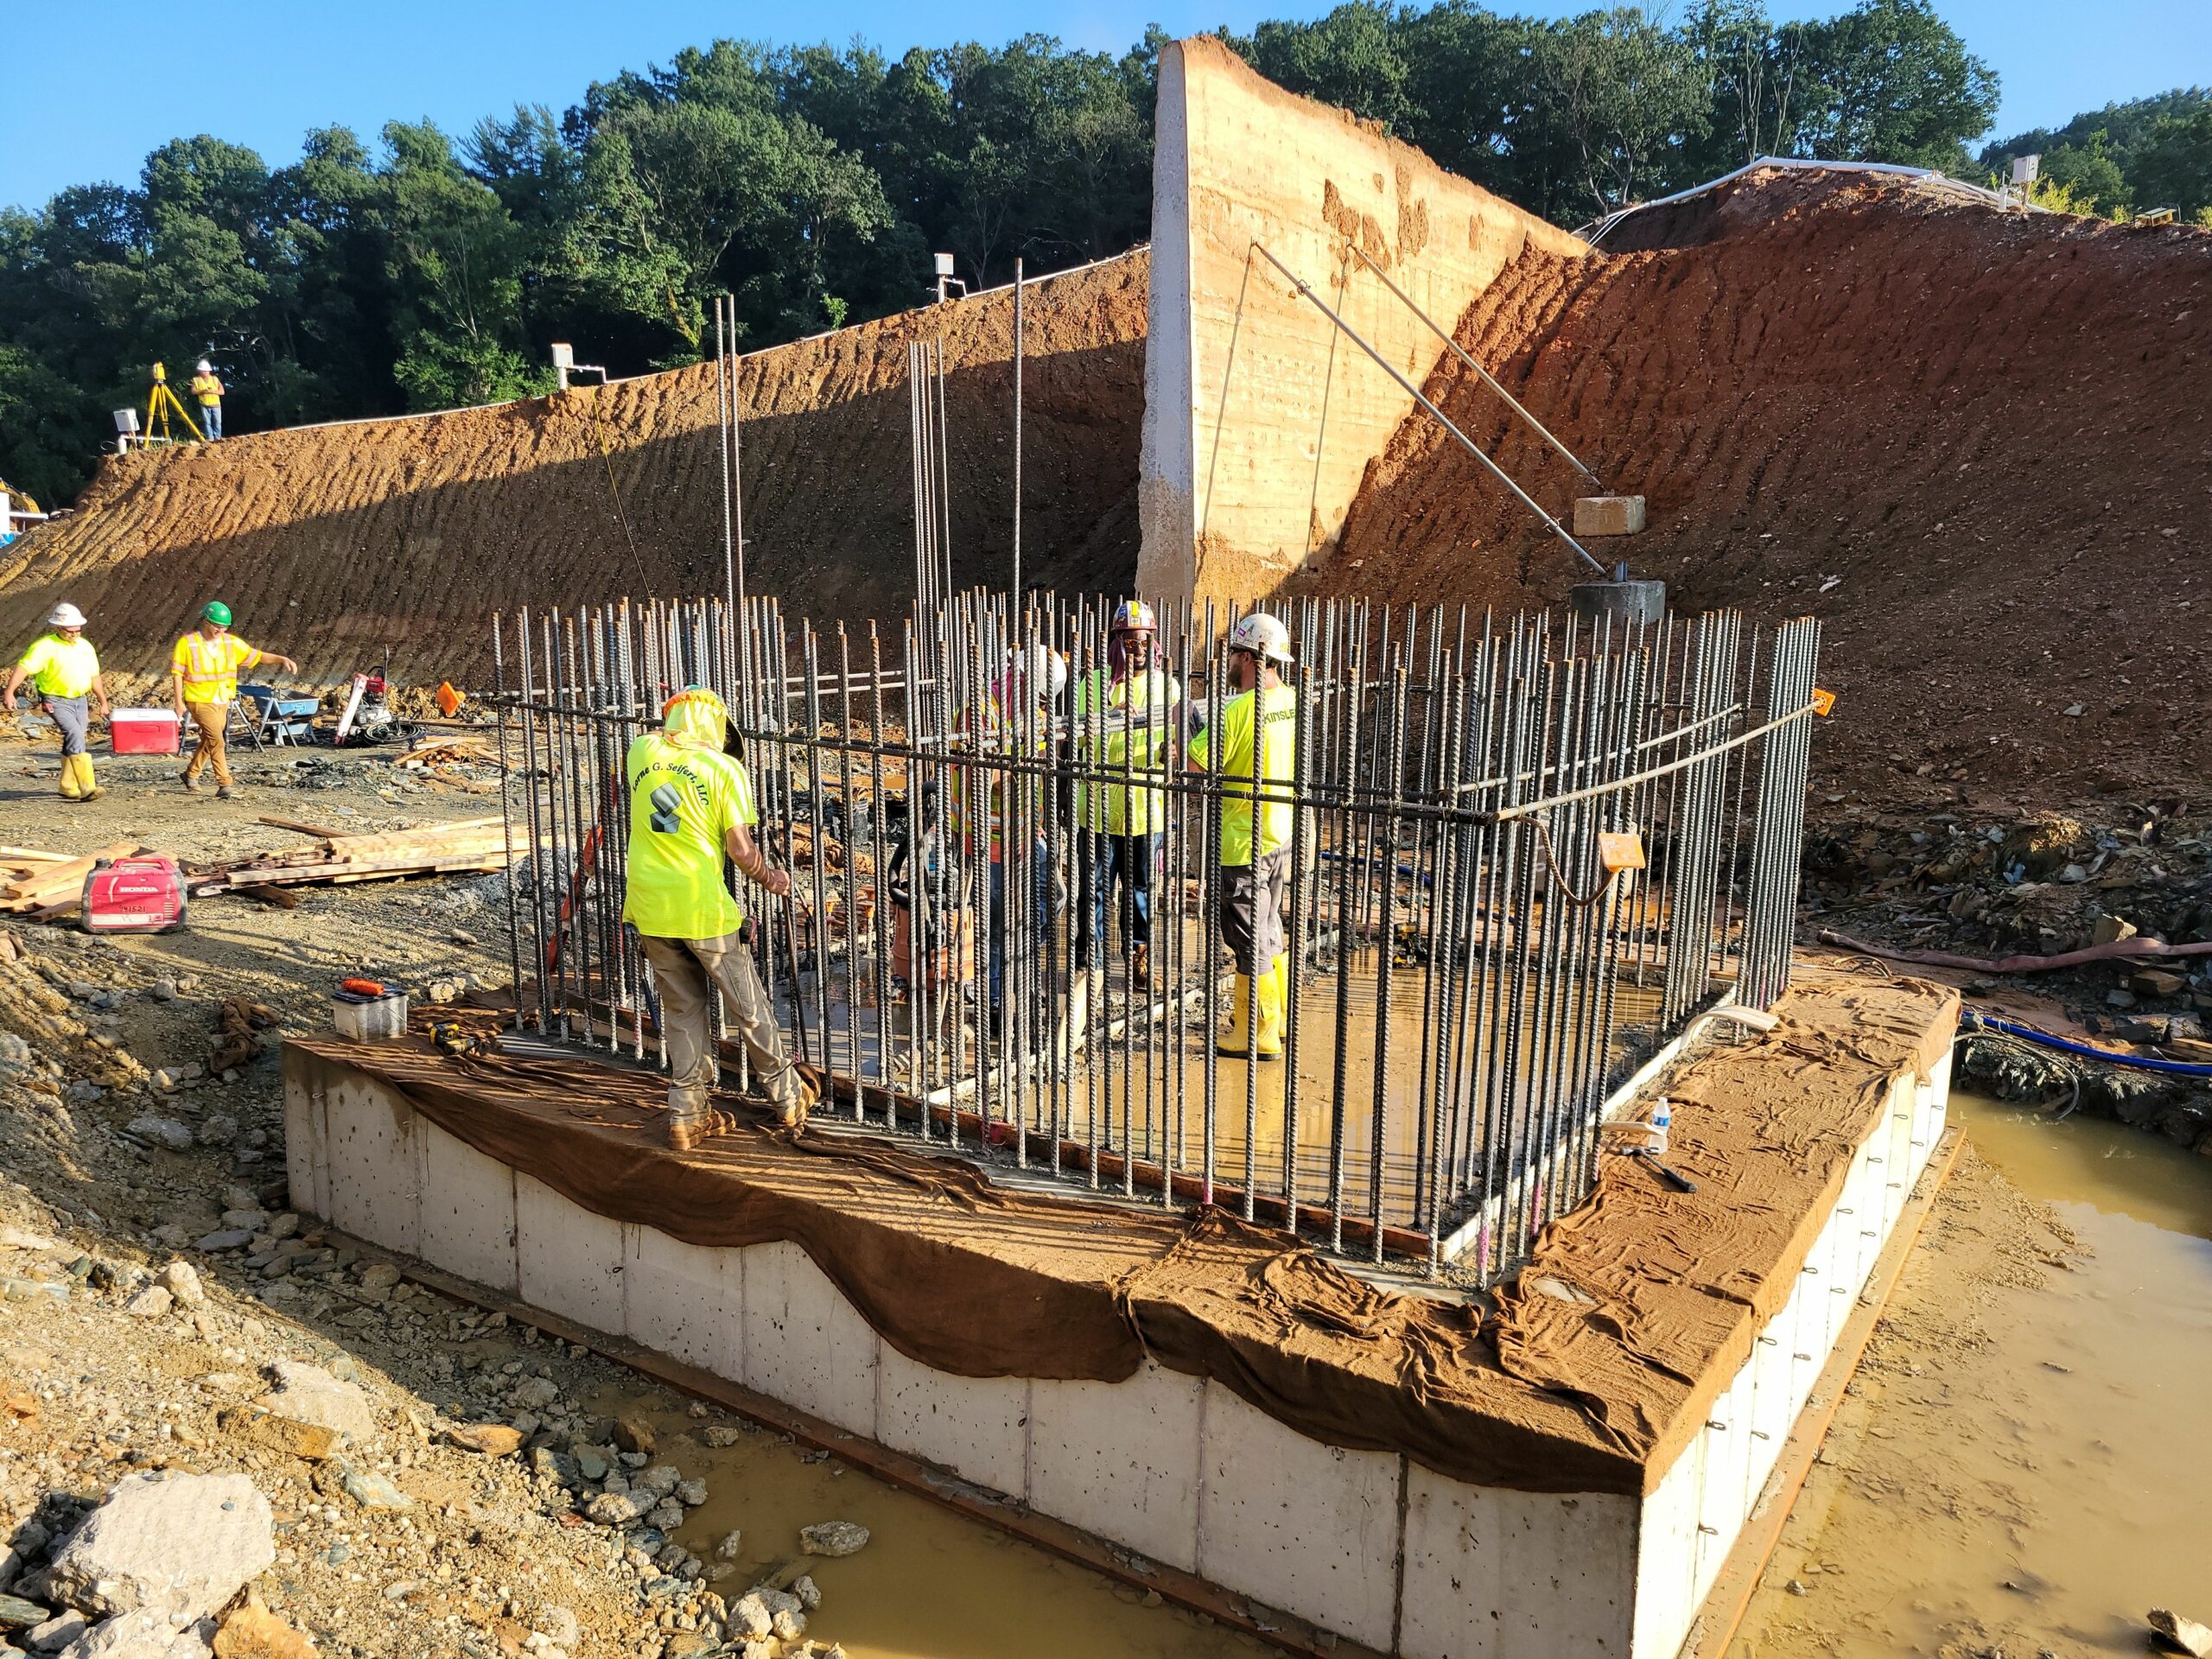 The new dam’s valve tower foundation has been poured and rebar for the valve tower walls are being set. The original 1911 core wall with temporary bracing is in the background.